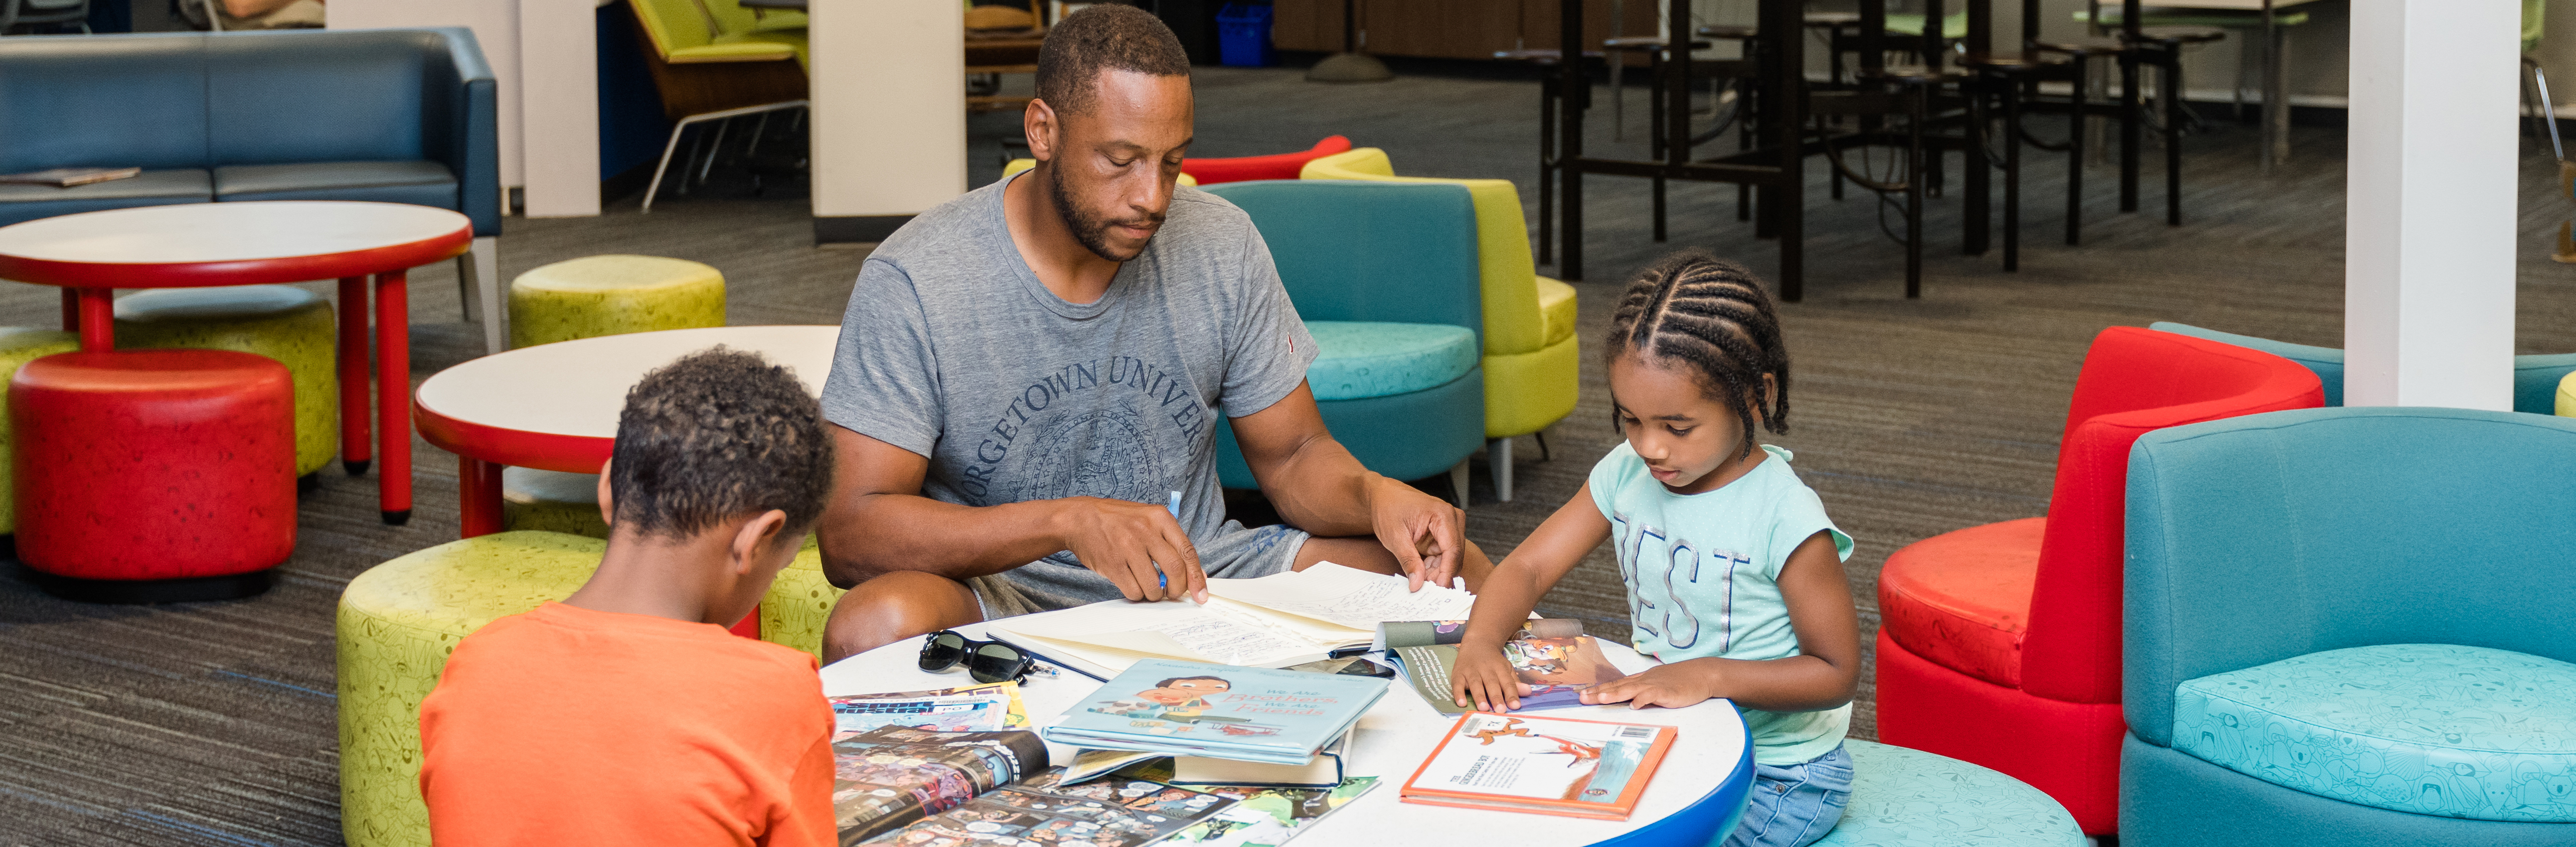 Father and children reading books at table in library